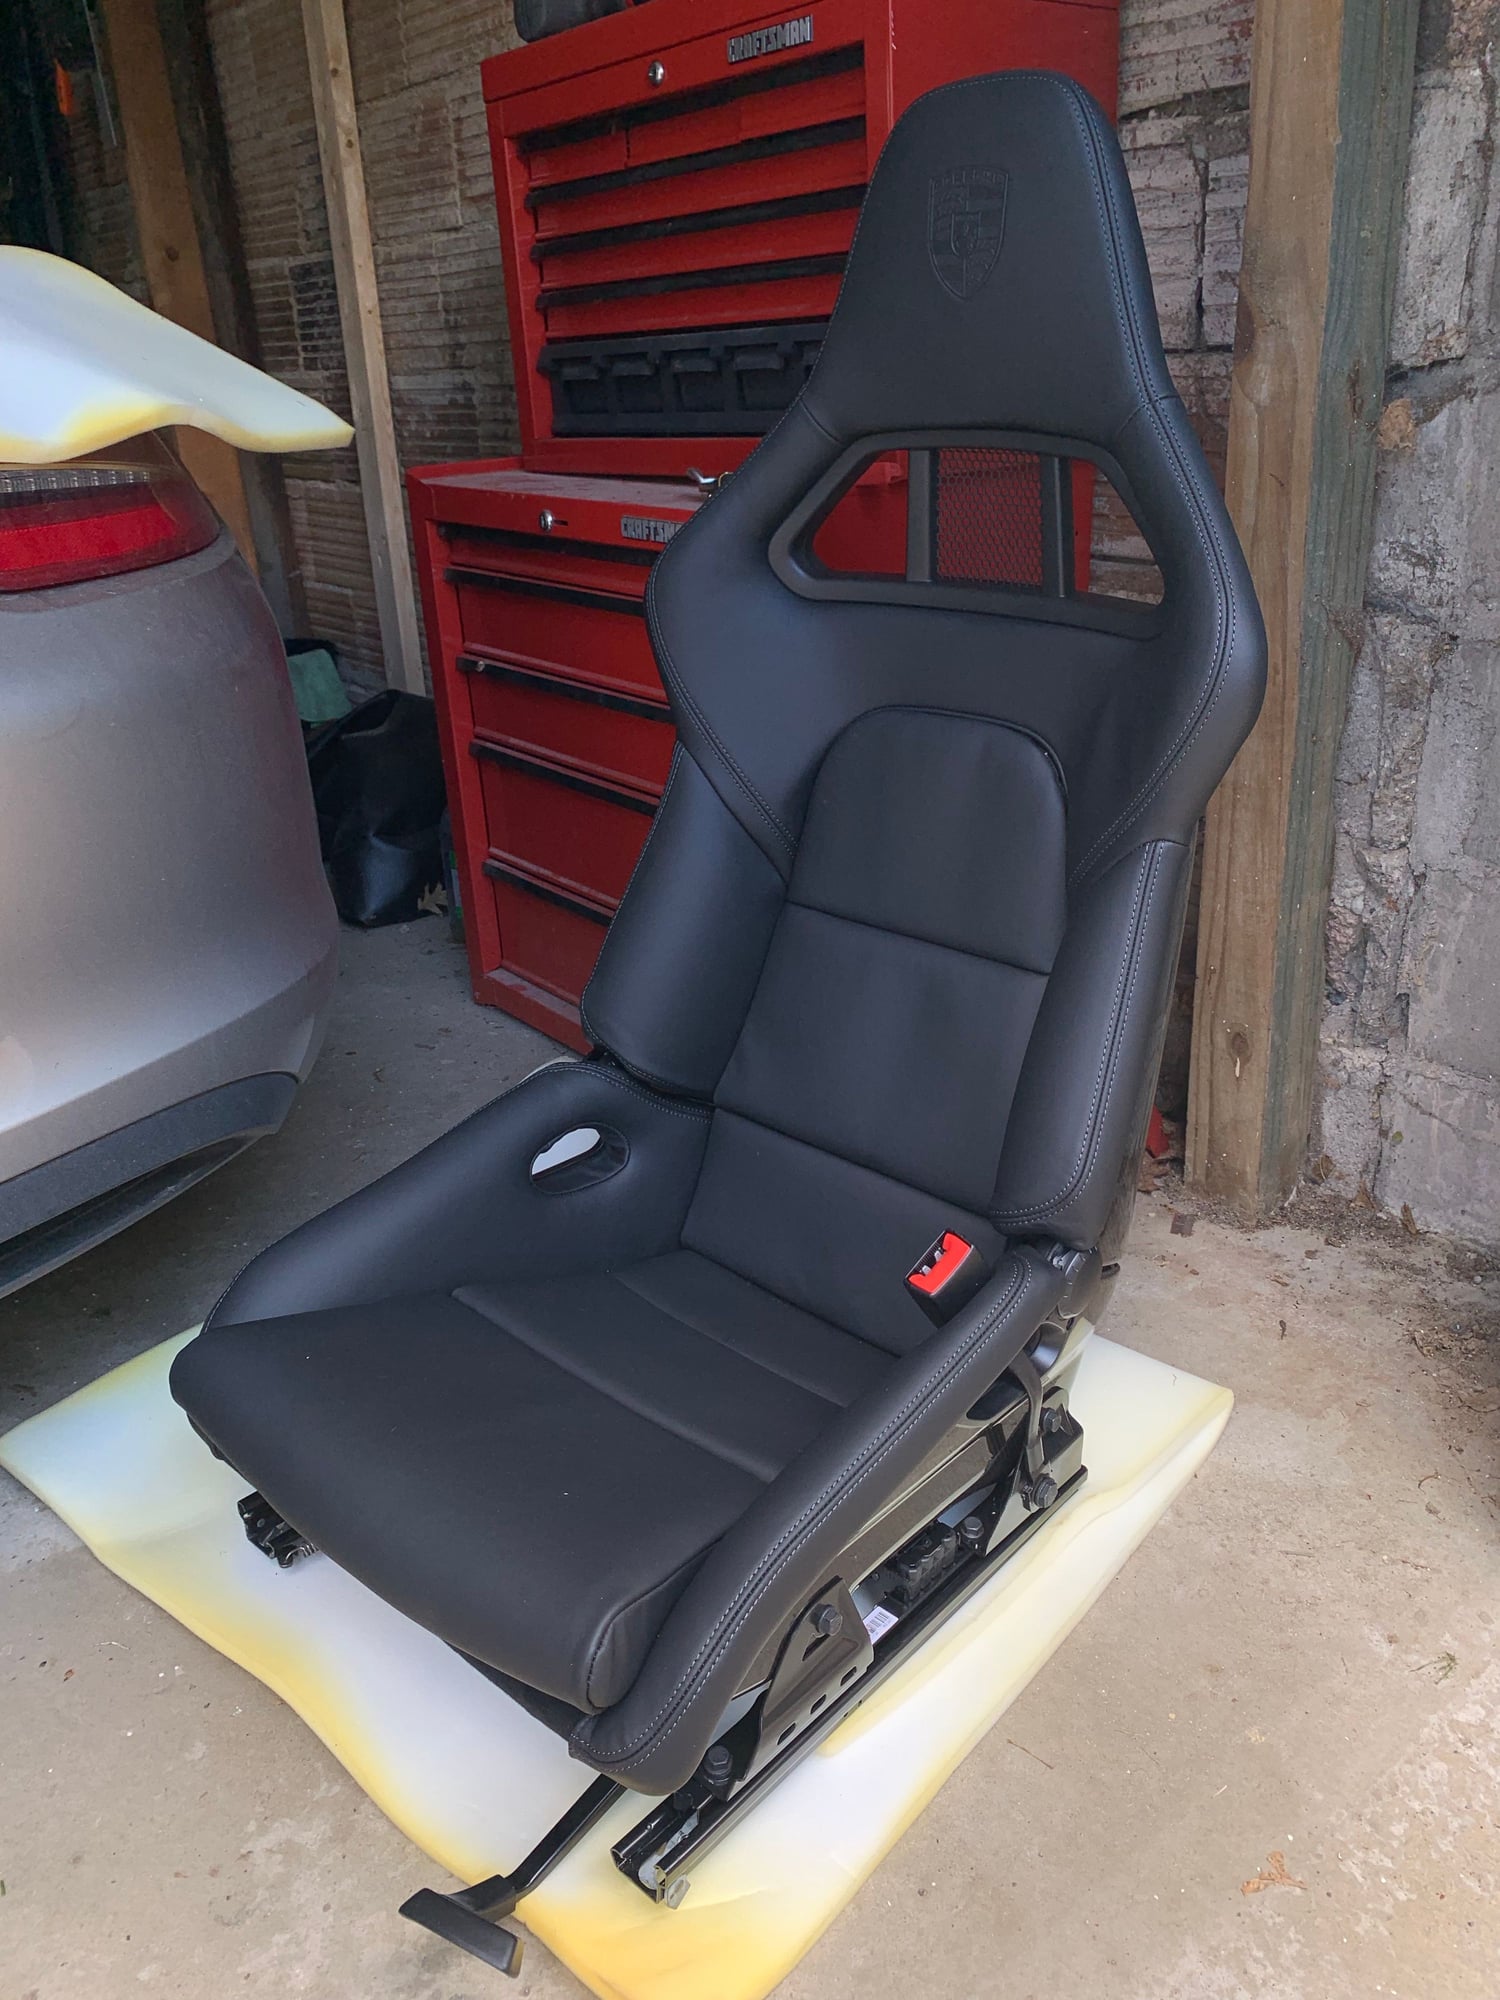 Interior/Upholstery - 981/991 GT2 Heated Foldable Buckets Rest of World, Like New (SET) $8800 OBO, Pgh PA - Used - 2012 to 2016 Porsche 911 - 2012 to 2016 Porsche Boxster - 2012 to 2016 Porsche Cayman - Bridgeville, PA 15017, United States